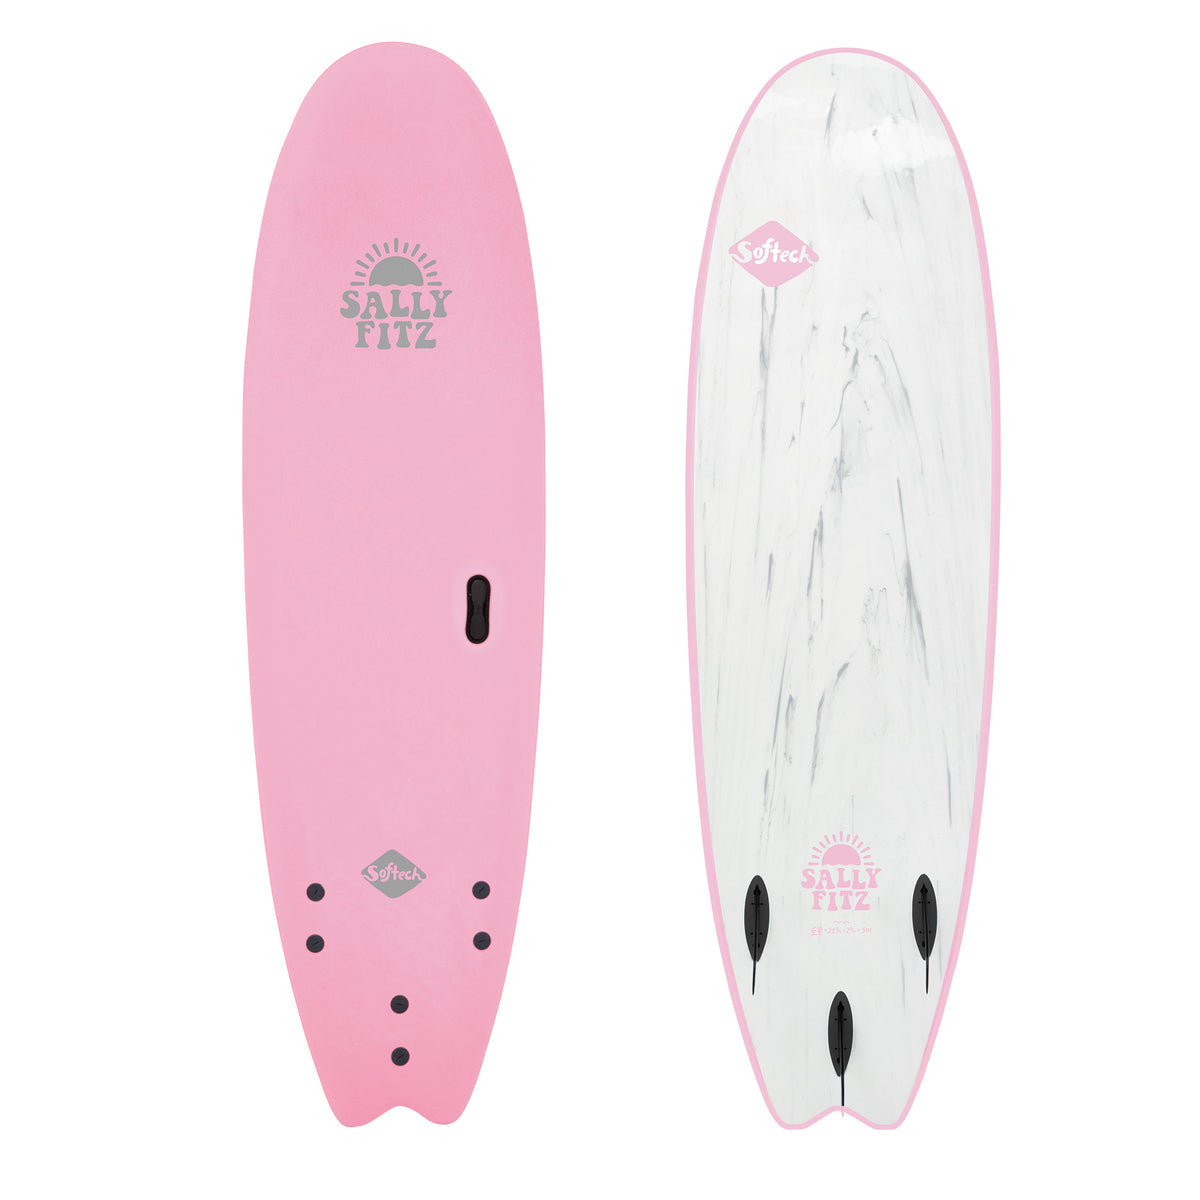 Softech Sally Fitzgibbons Soft Surfboard Pink 6ft6in